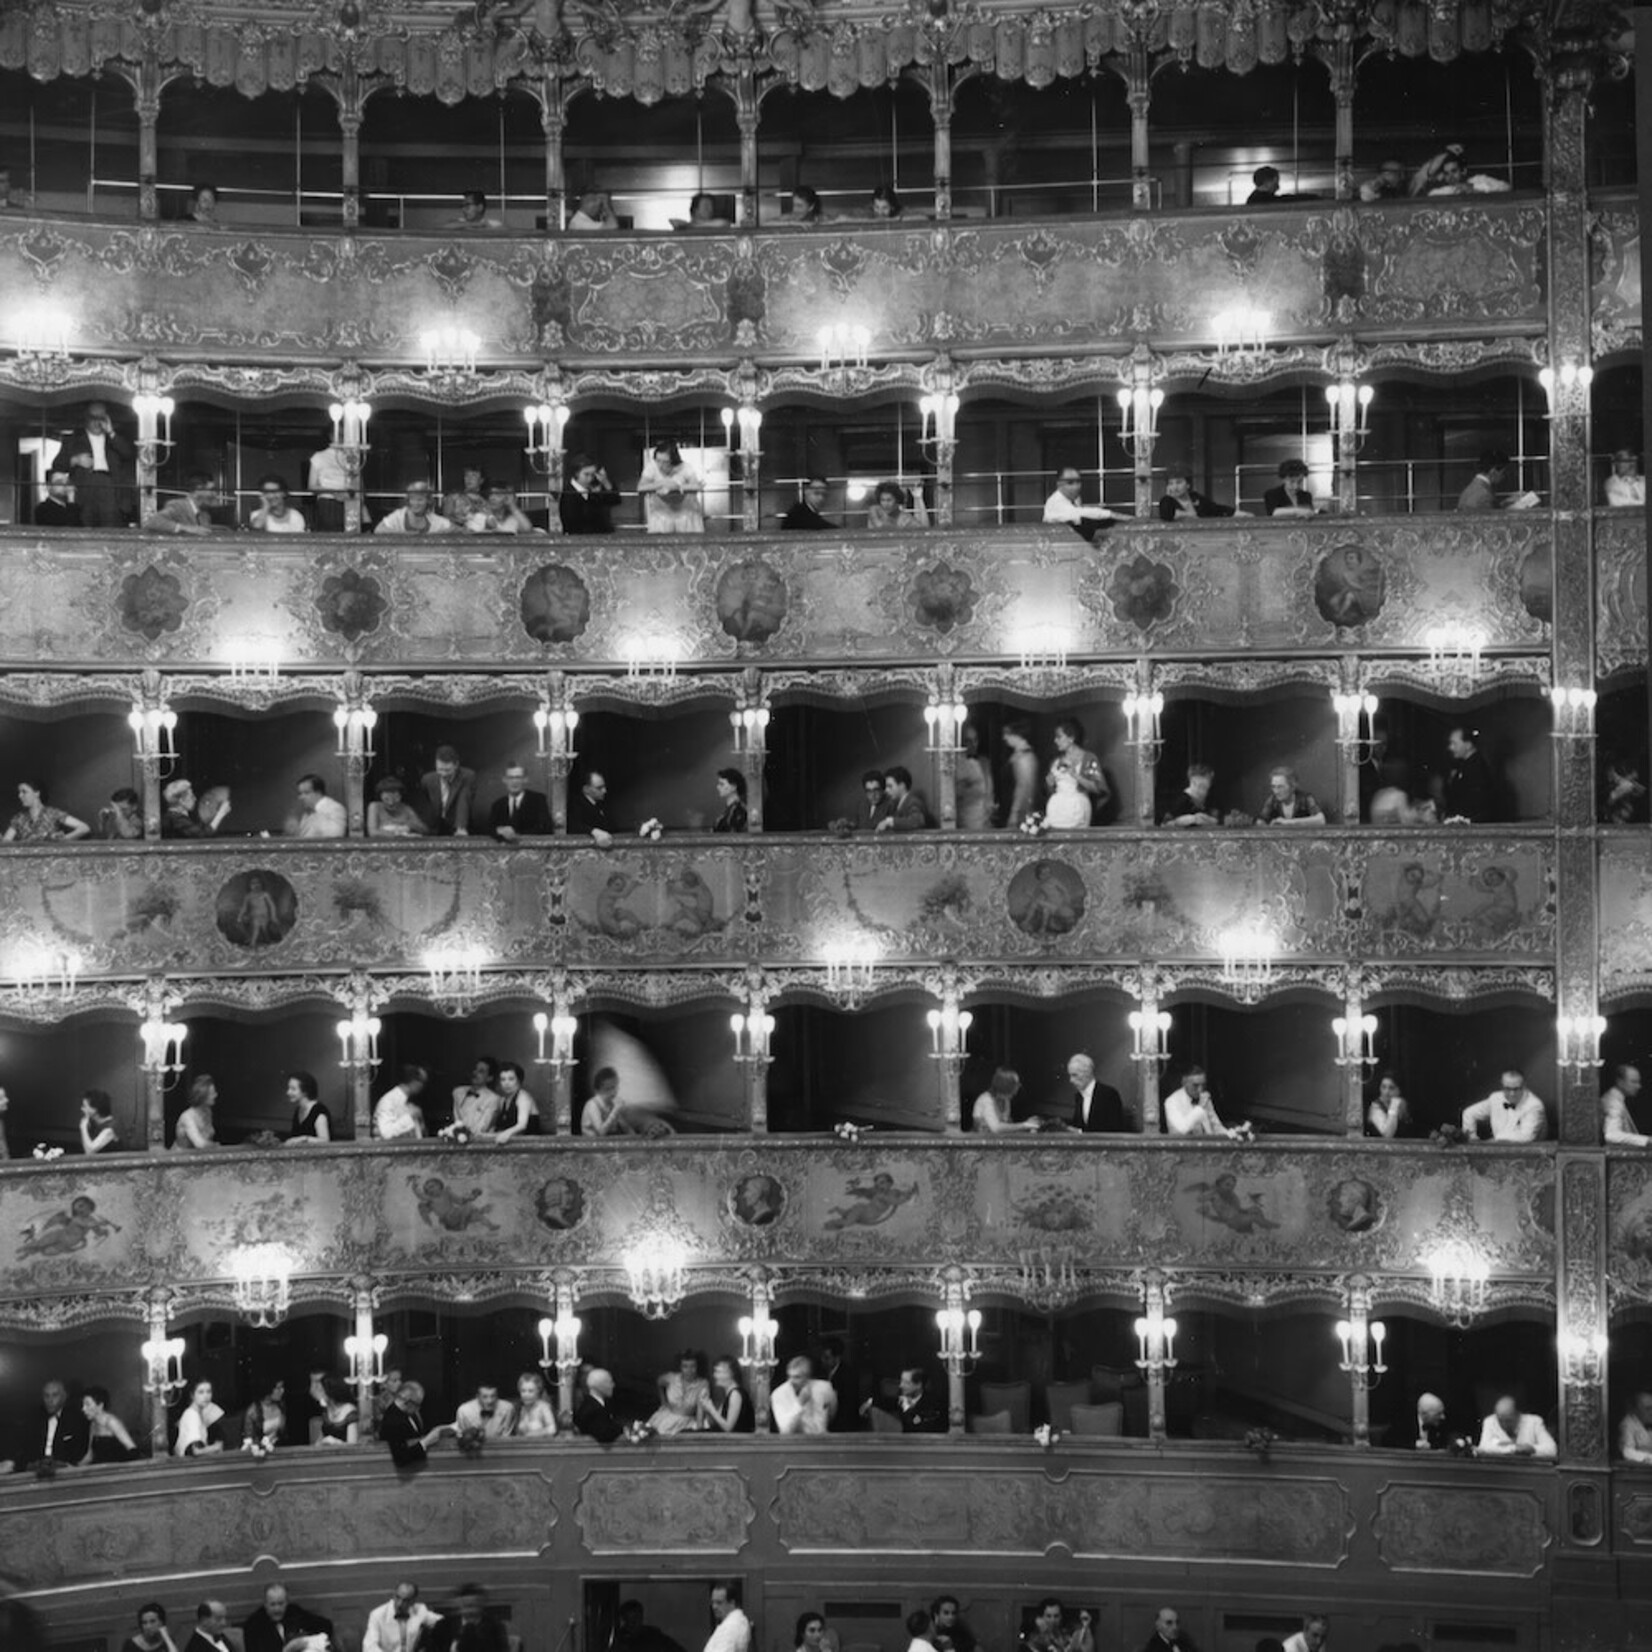 Getty Images Gallery La Fenice by Erich Auerbach /via Getty Gallery Images